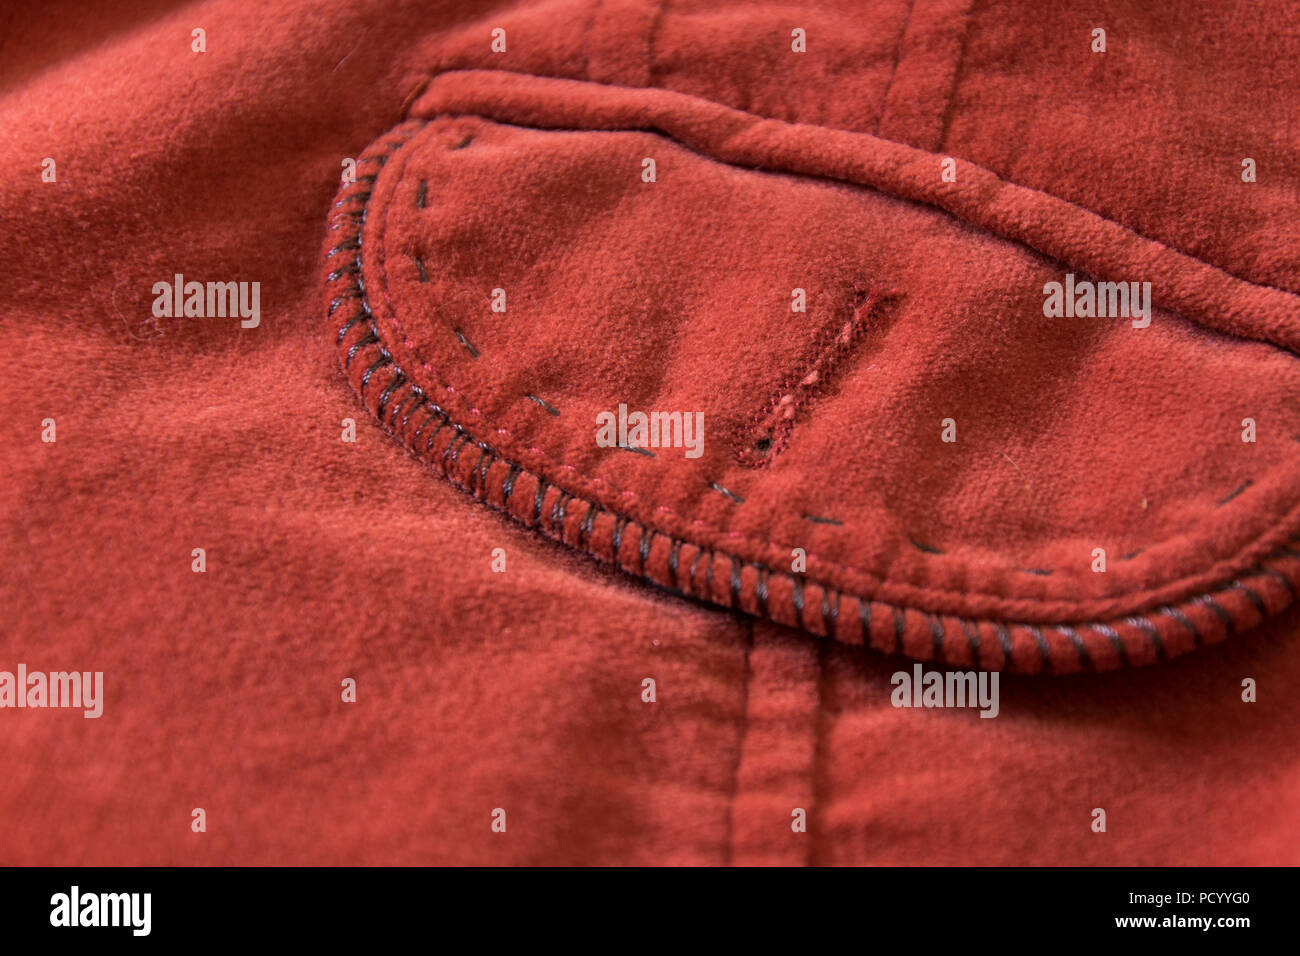 Close up view of pocket of old-fashioned red velvet jacket Stock Photo